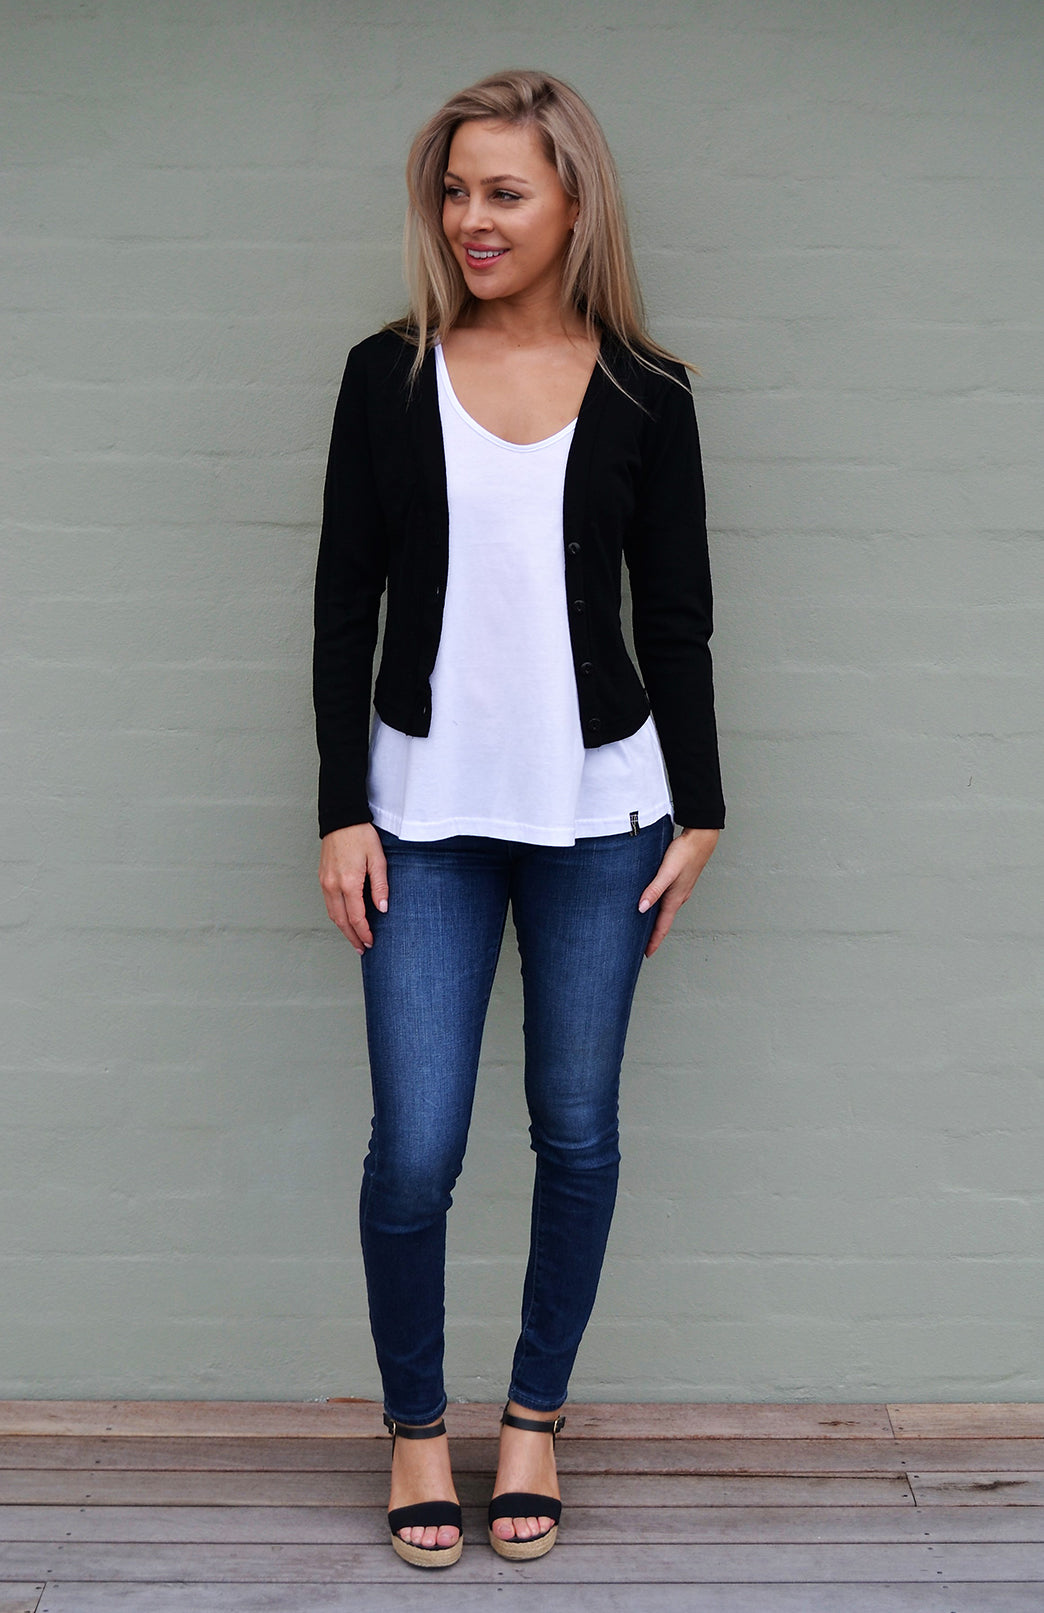 Black Open Cardigan with Cropped Top Outfits (8 ideas & outfits)